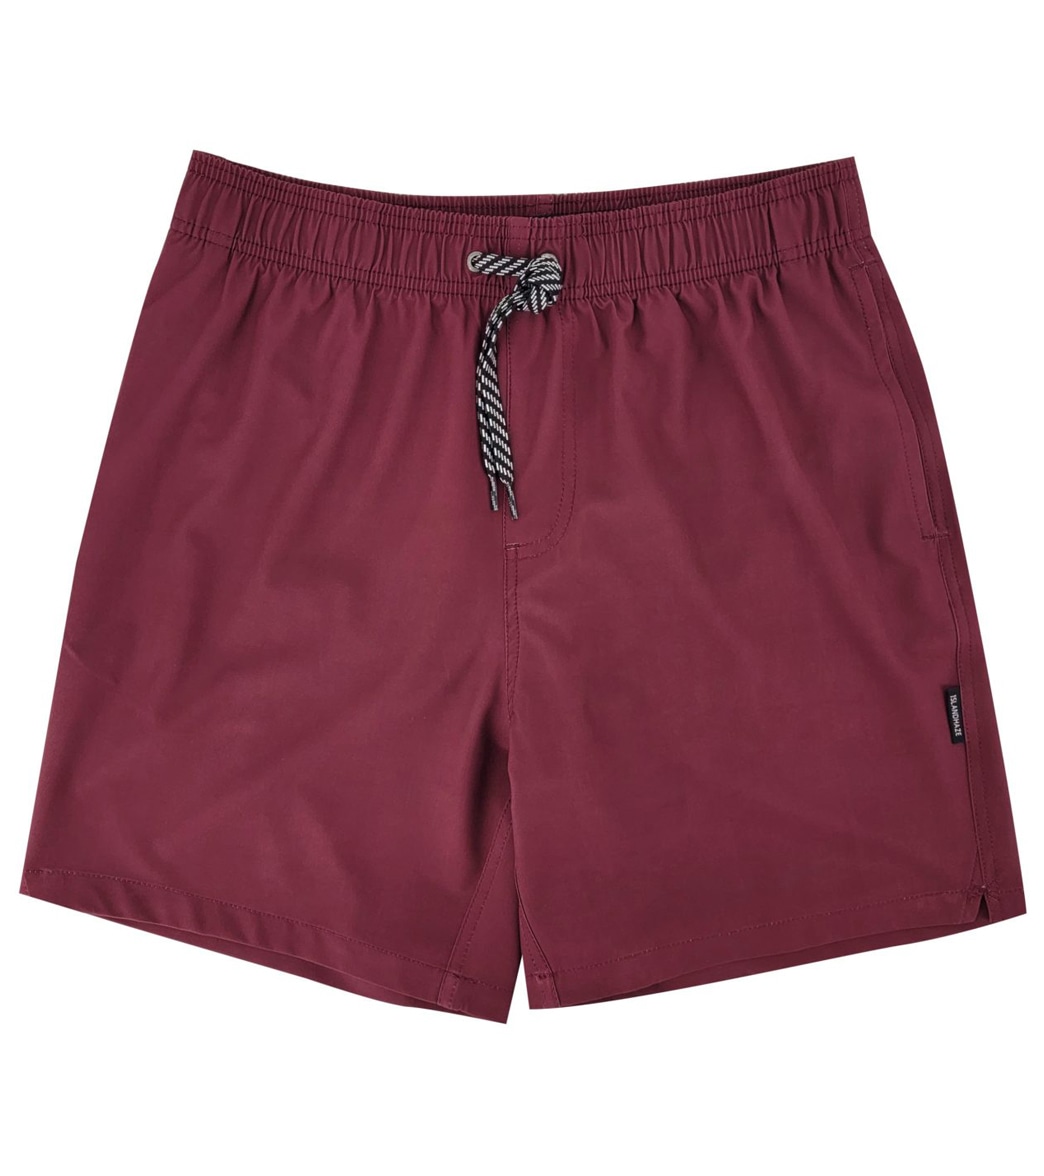 Island Haze Men's 16.5 Barbados Solid Volley Shorts - Wine Red Large Polyester - Swimoutlet.com